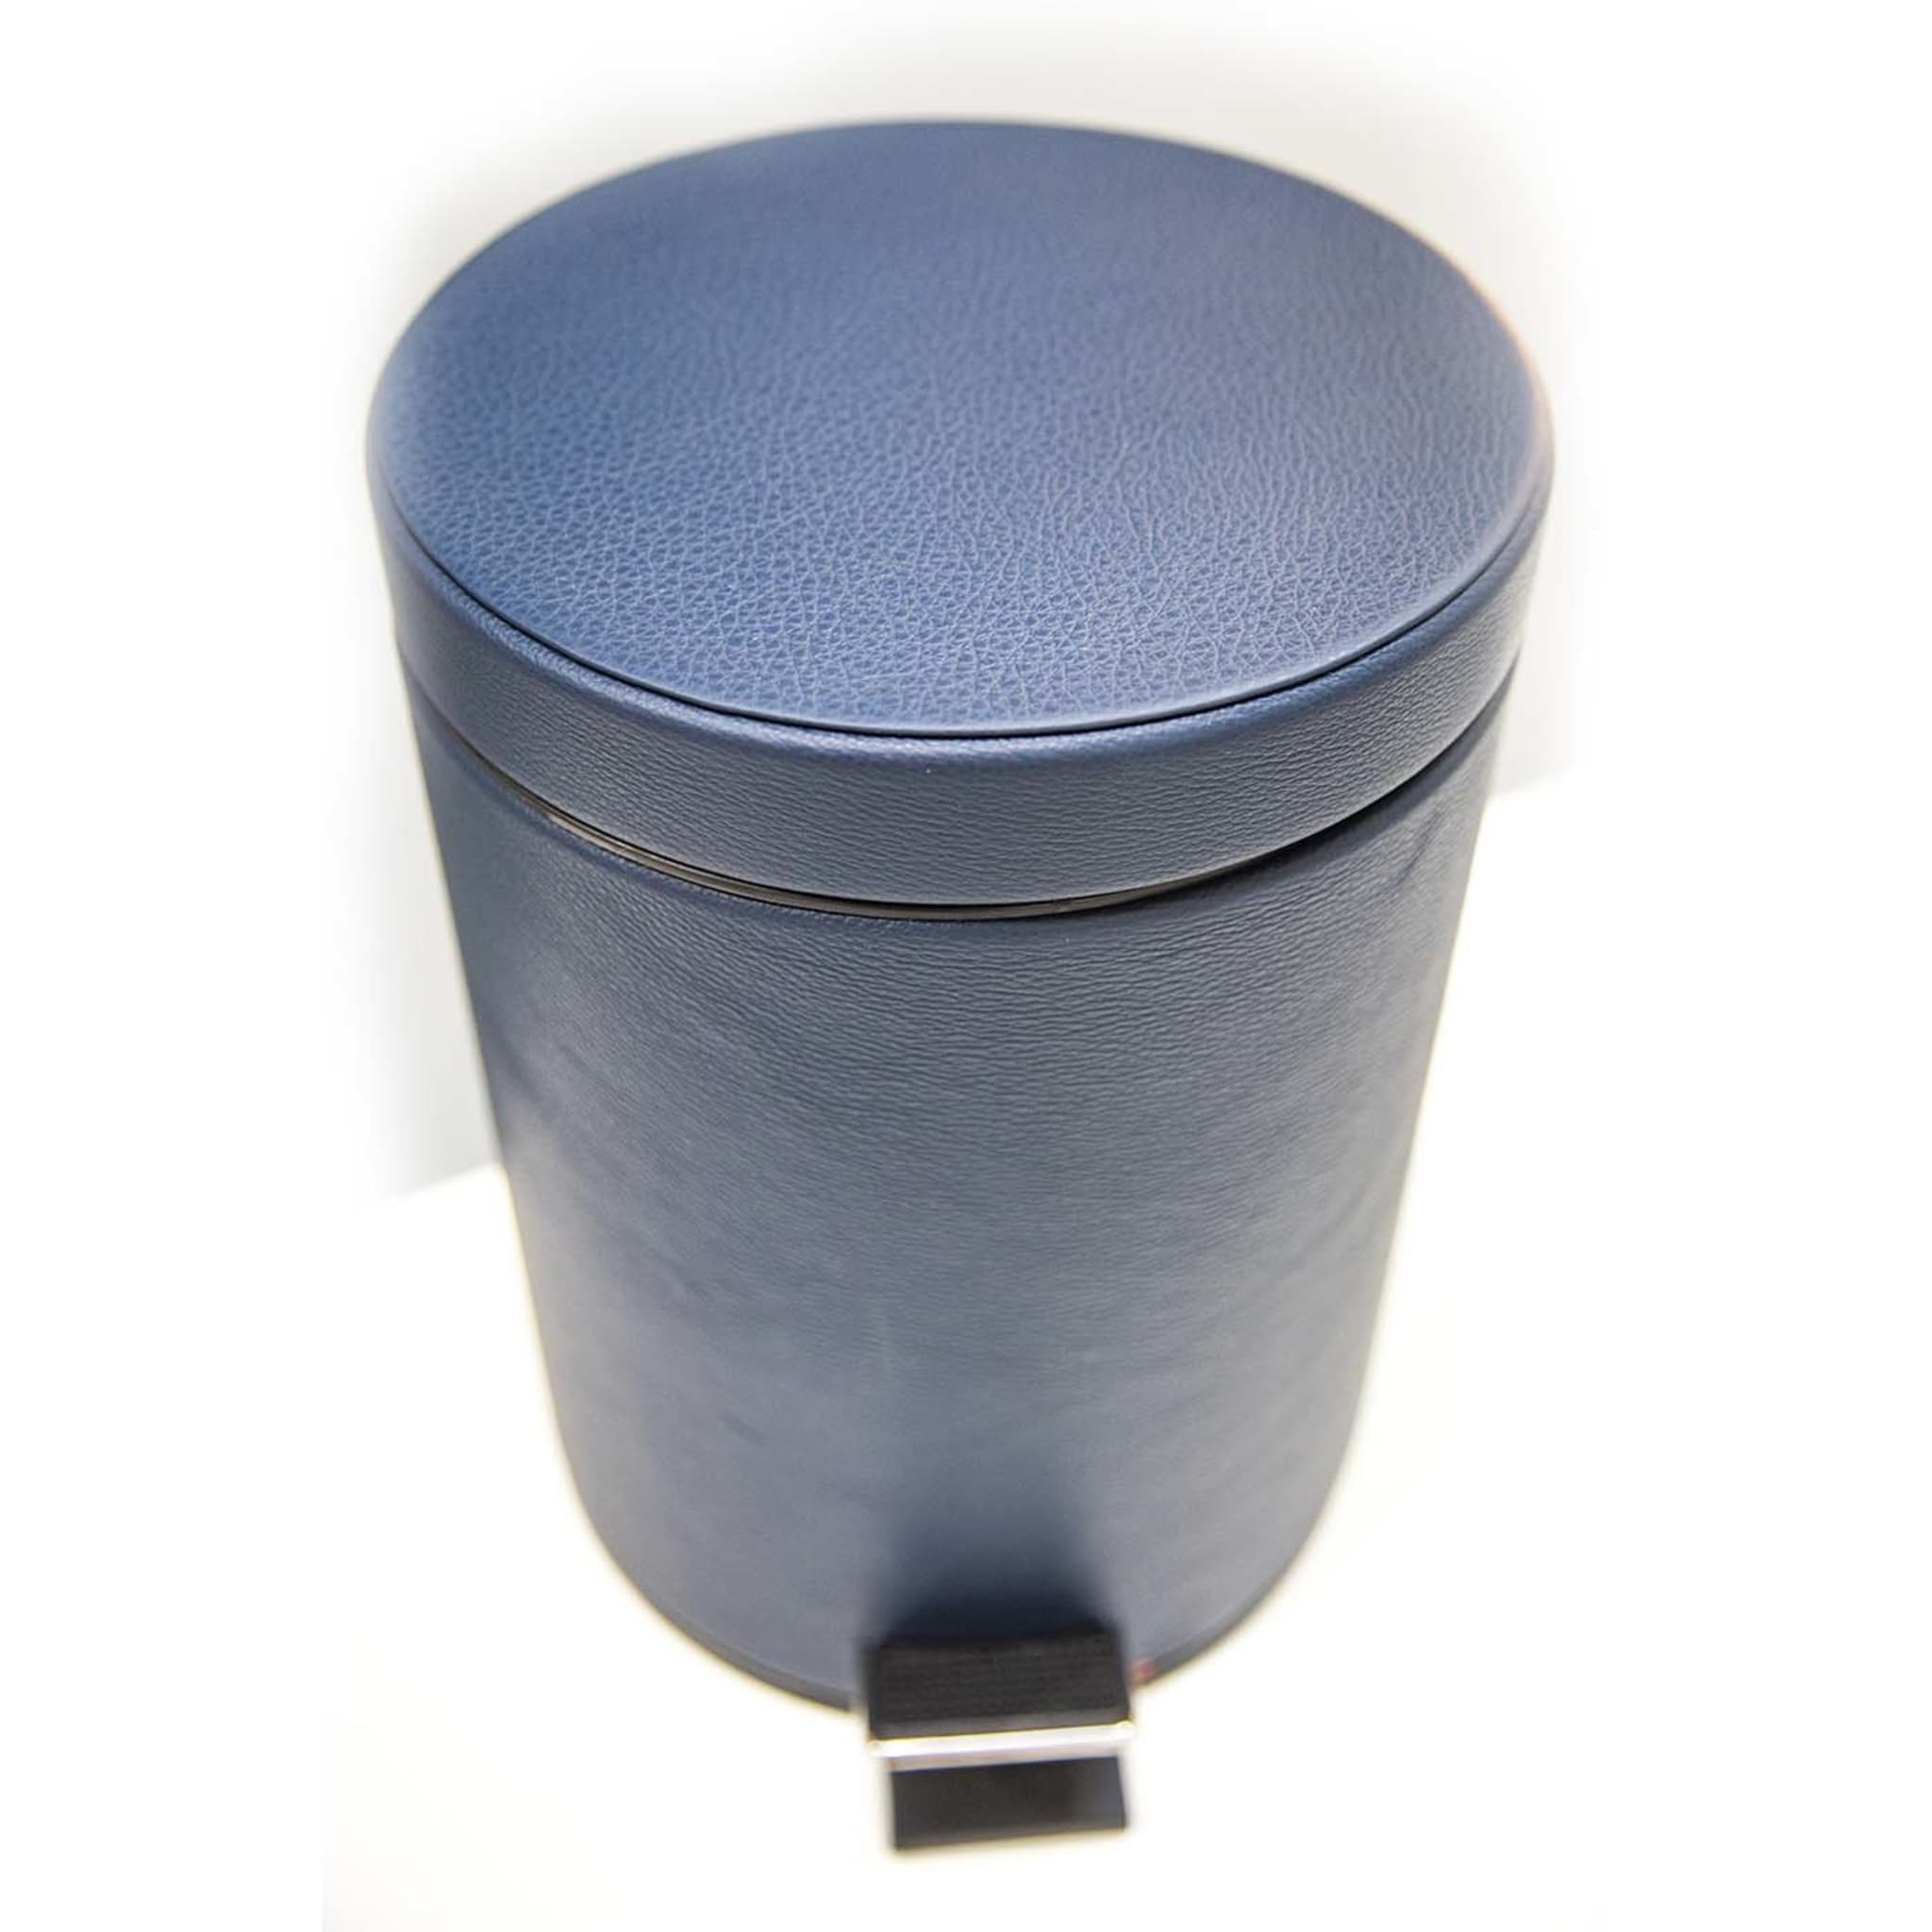 Leather Bin with Lid in Blue - Alternative view 2